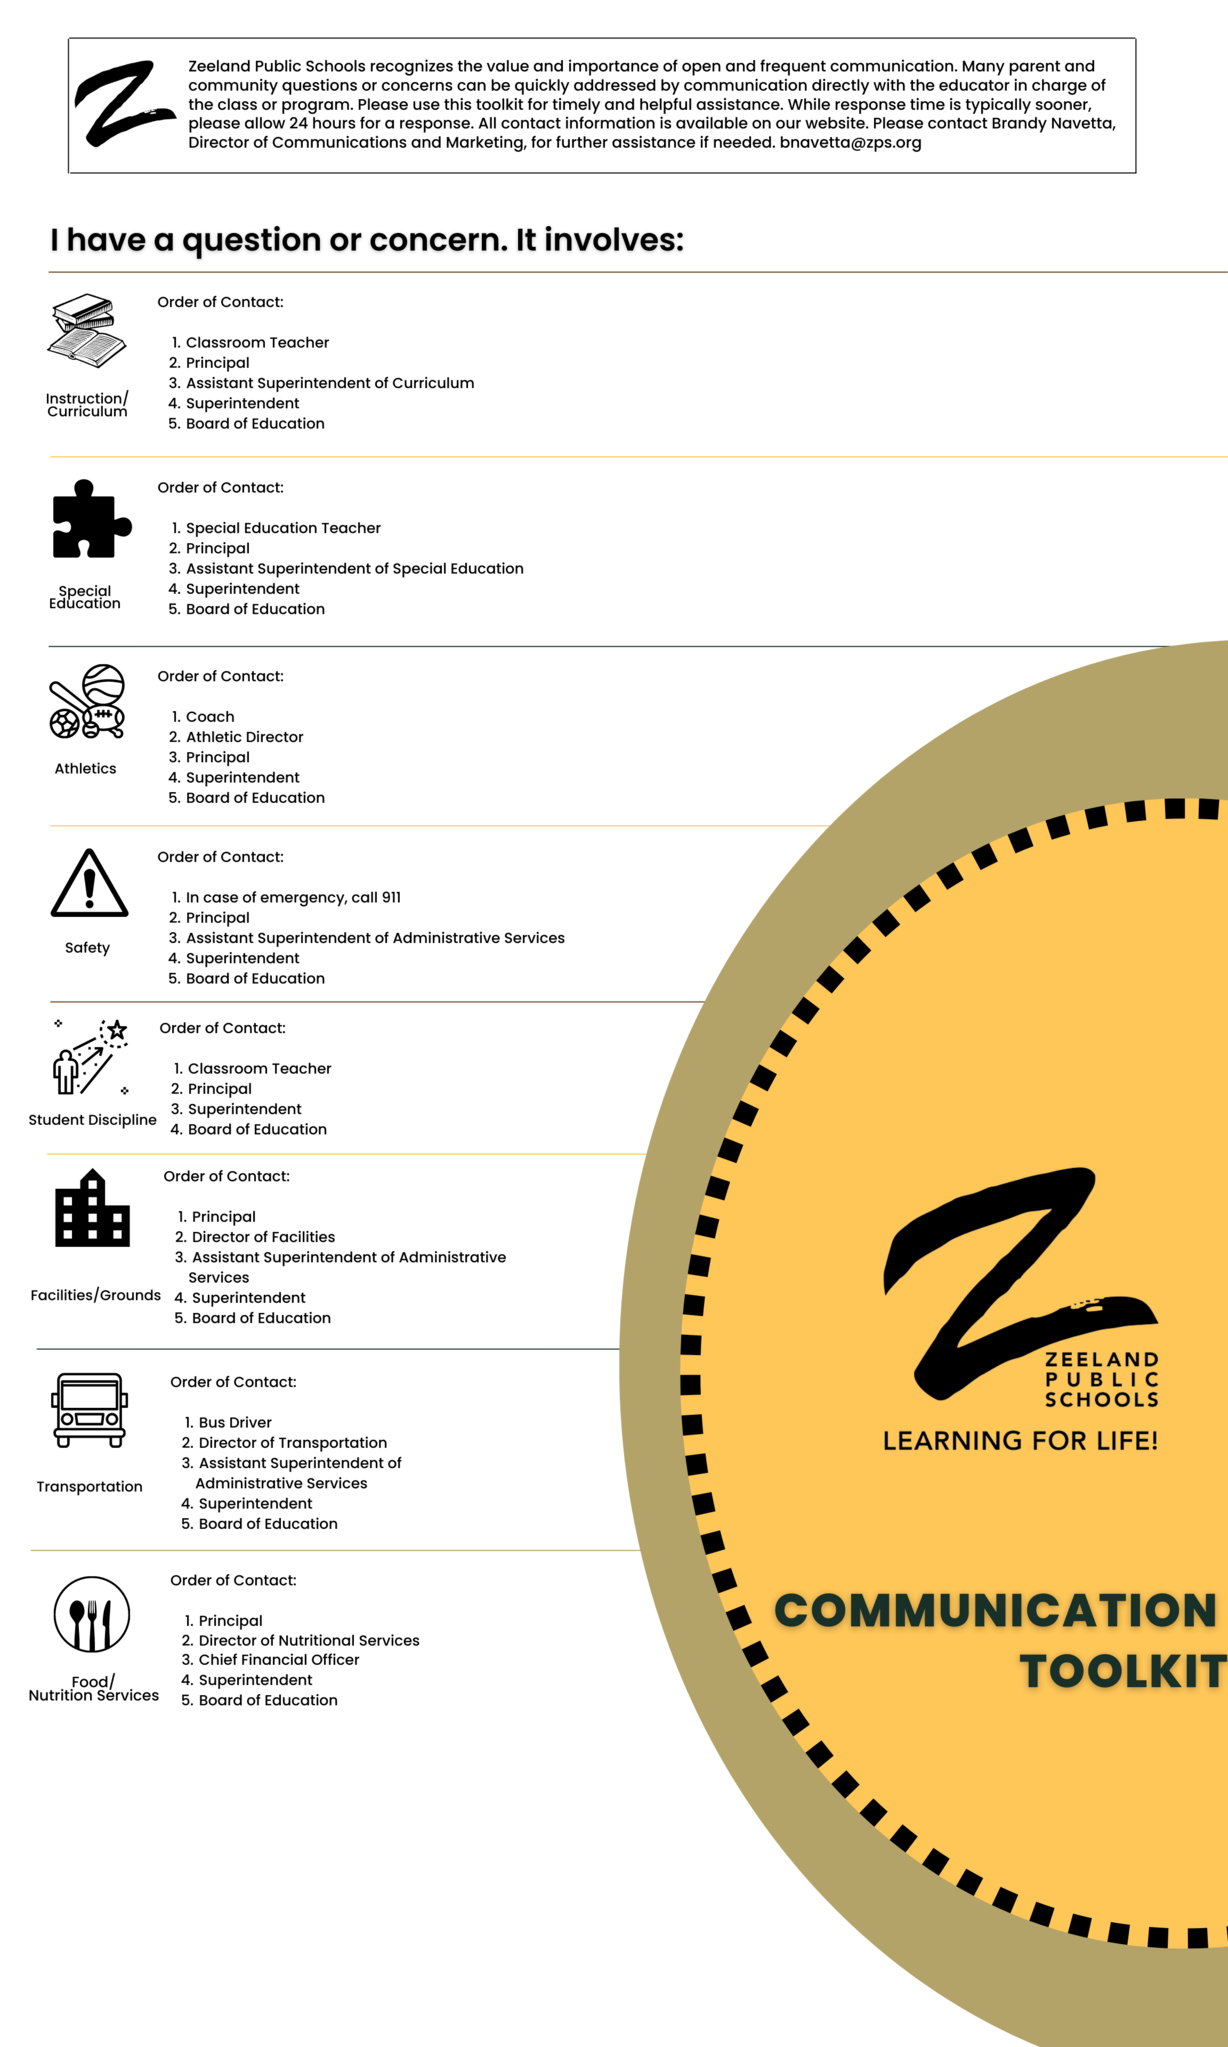 Chain of Communication for concerns - contact 748-3000